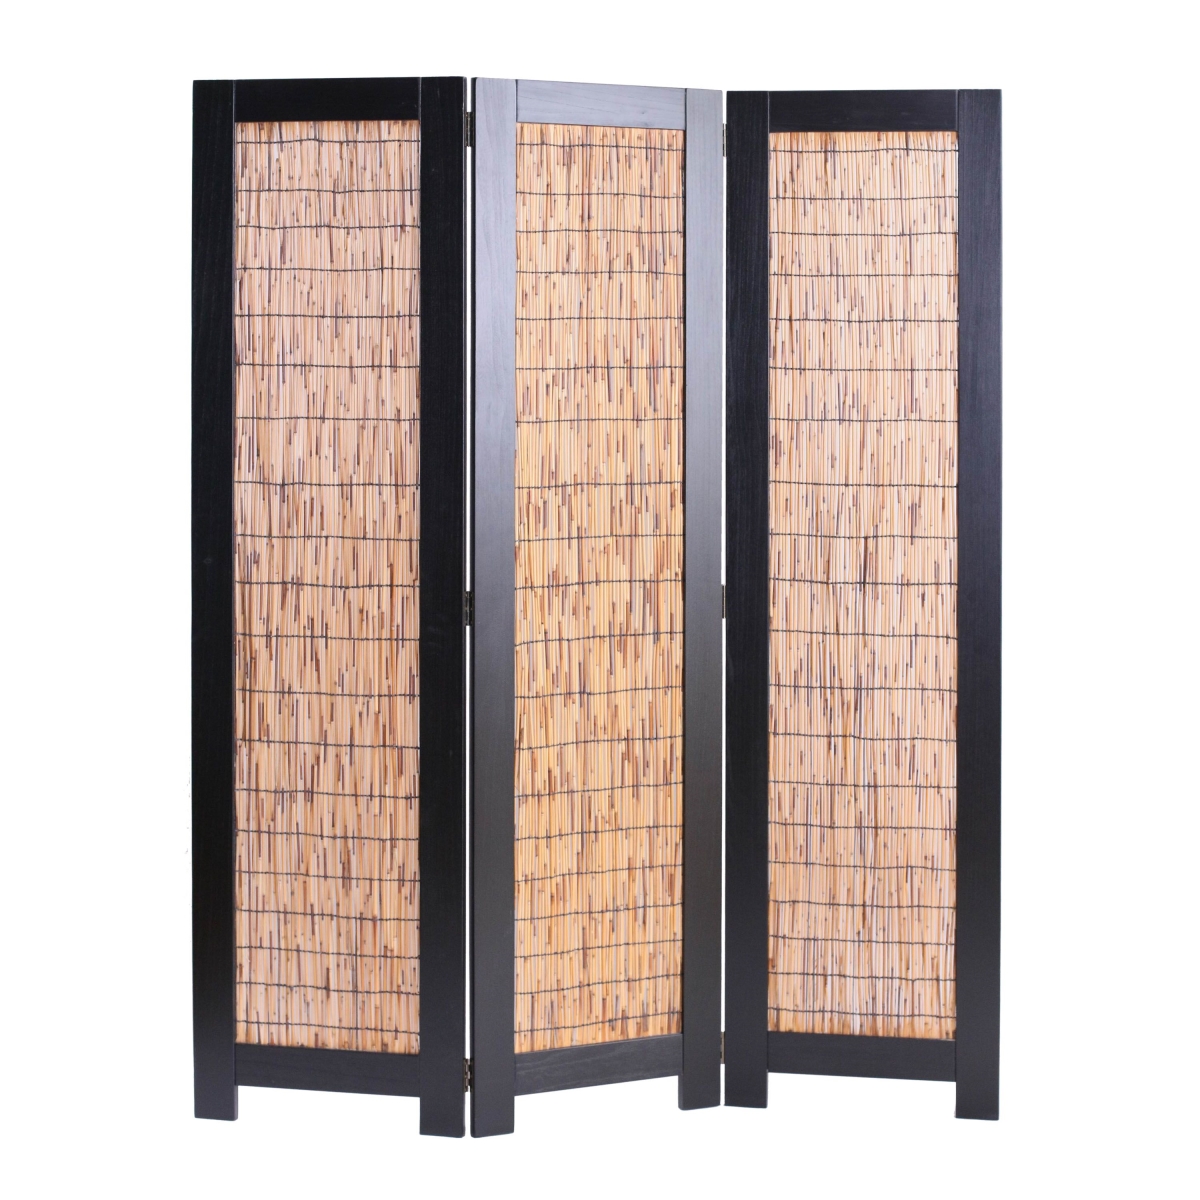 342755 47 X 1.5 X 67 In. Black Wood Wicker Screen With 3 Panel